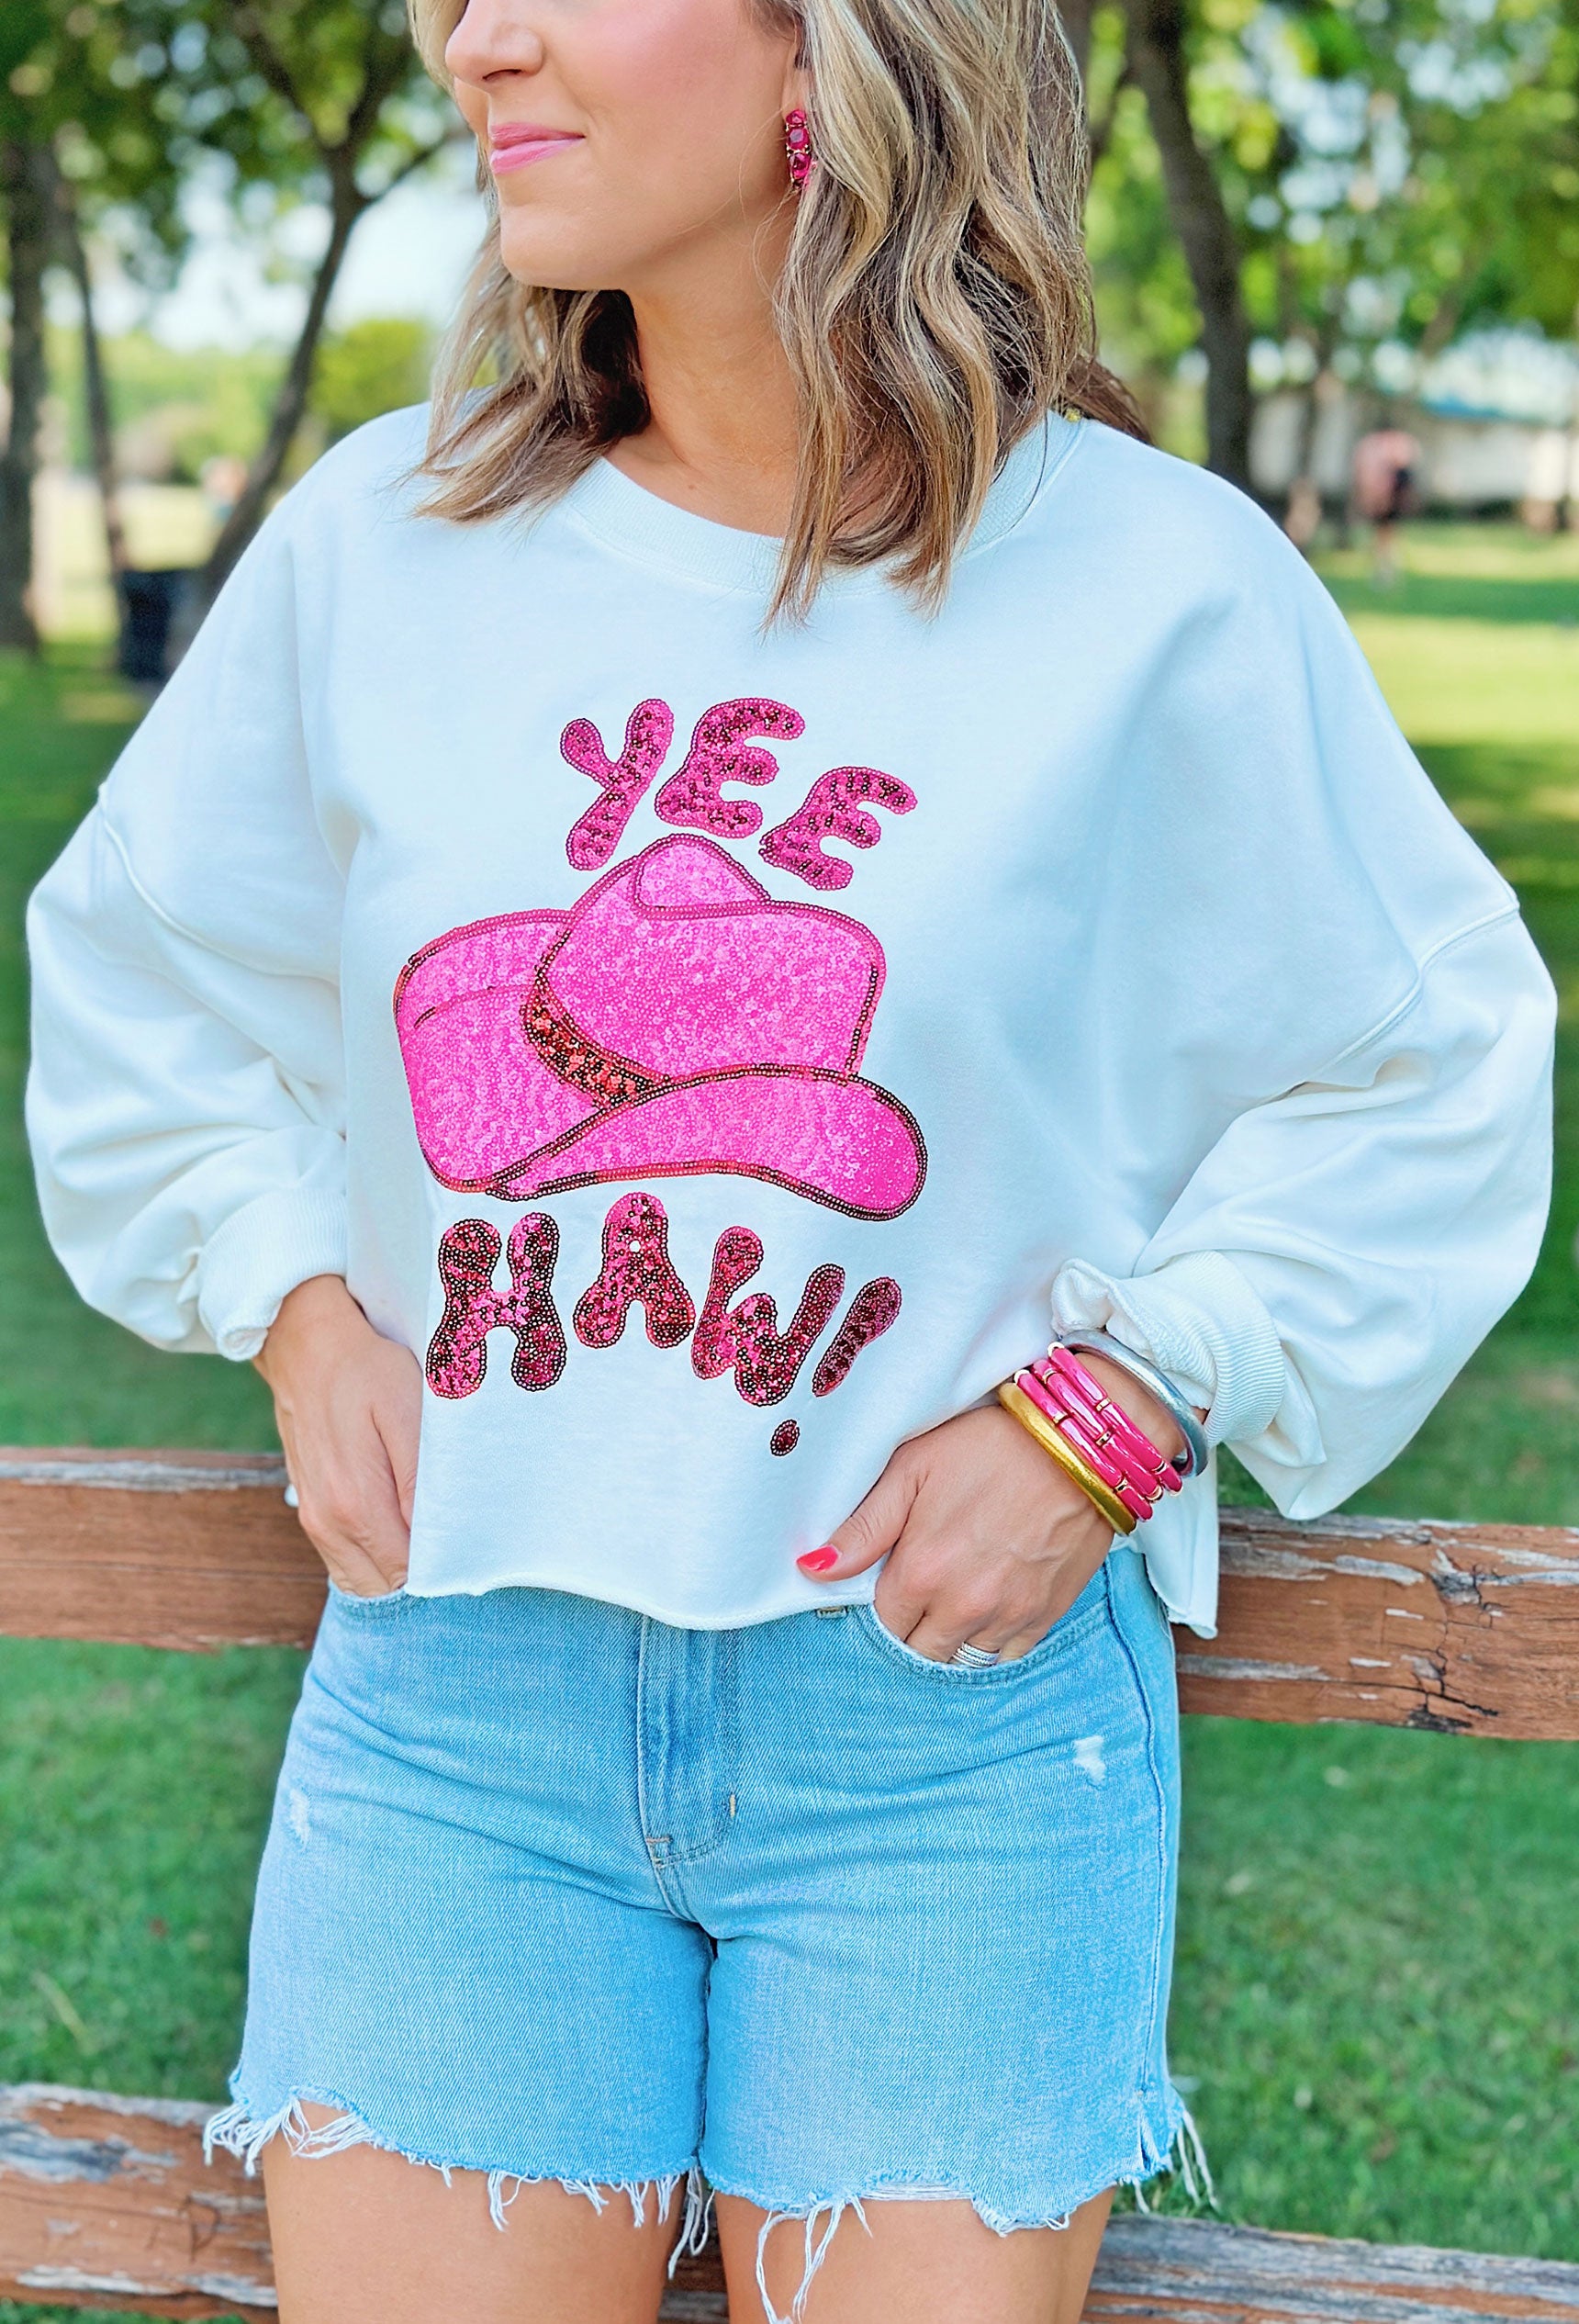 Yee Haw Sequin Pullover, White cropped pullover with eye-catching "Yee Haw" in fuchsia sequins and a bright pink sequin cowgirl hat